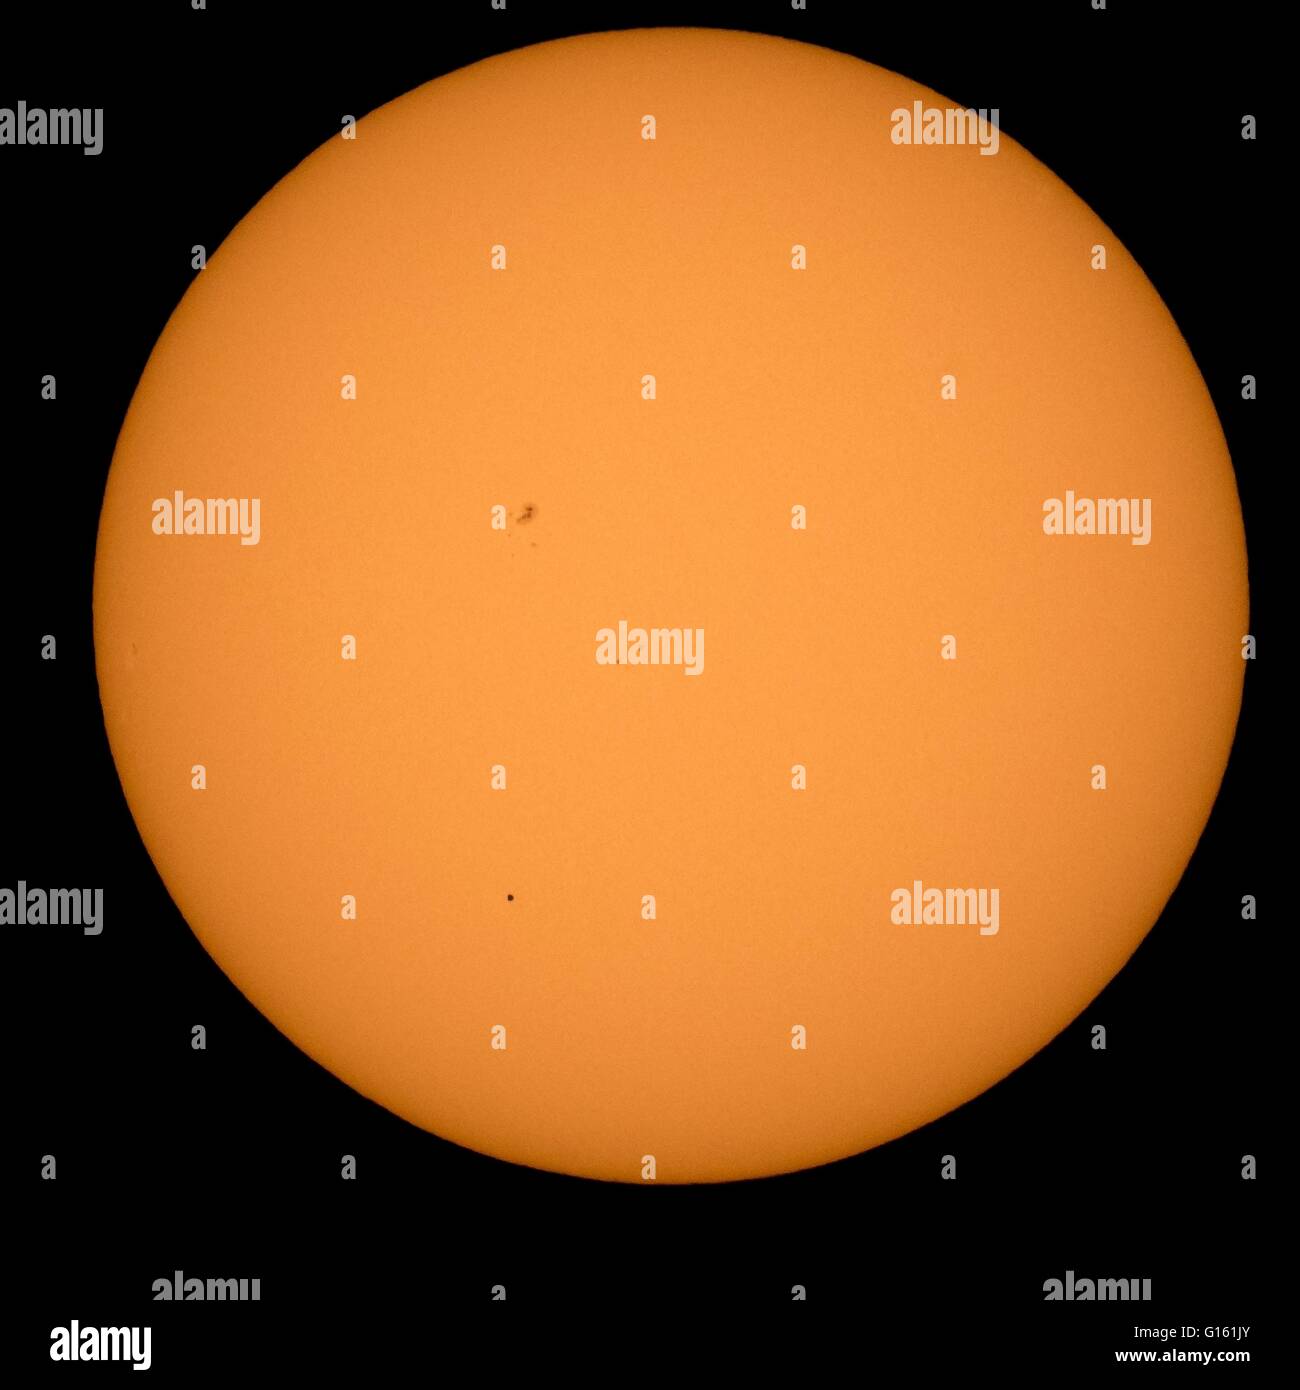 The planet Mercury is seen in silhouette, lower third of image, as it transits across the face of the sun May 9, 2016, as viewed from Boyertown, Pennsylvania. Mercury passes between Earth and the sun only about 13 times a century, with the previous transit taking place in 2006. Stock Photo